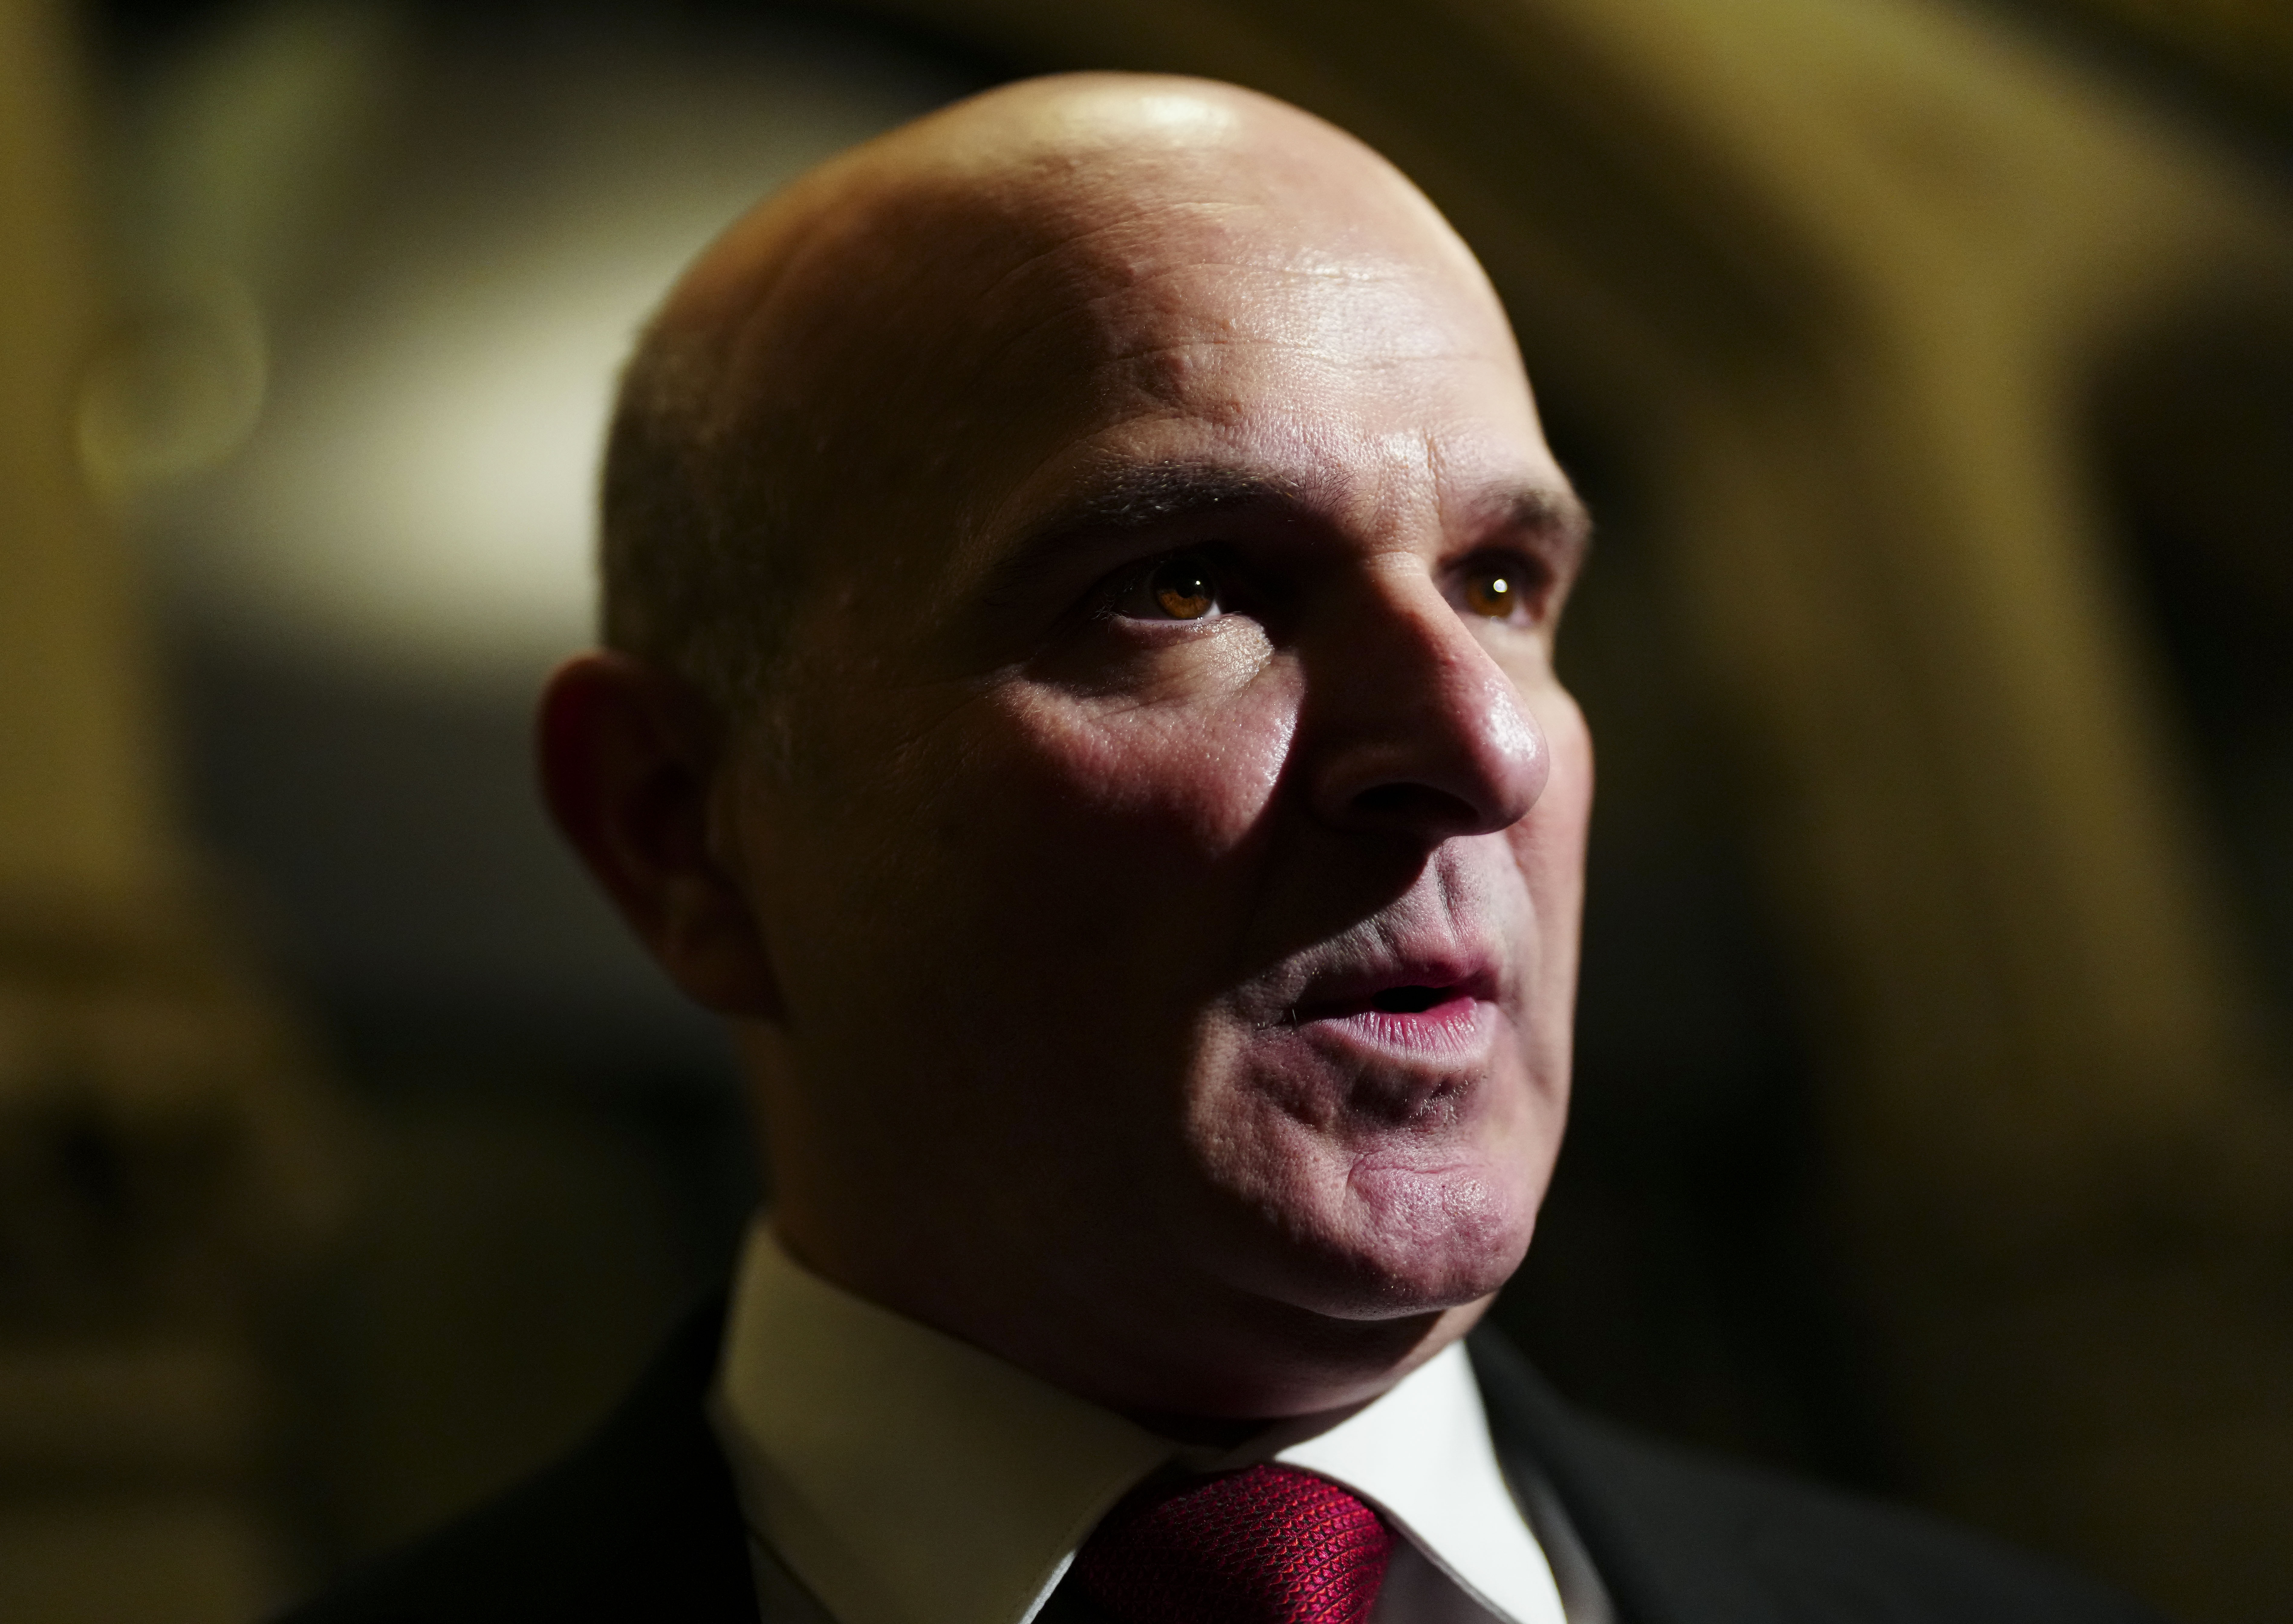 Minister Boissonnault to testify before ethics committee over ties to lobbyist, PPE company